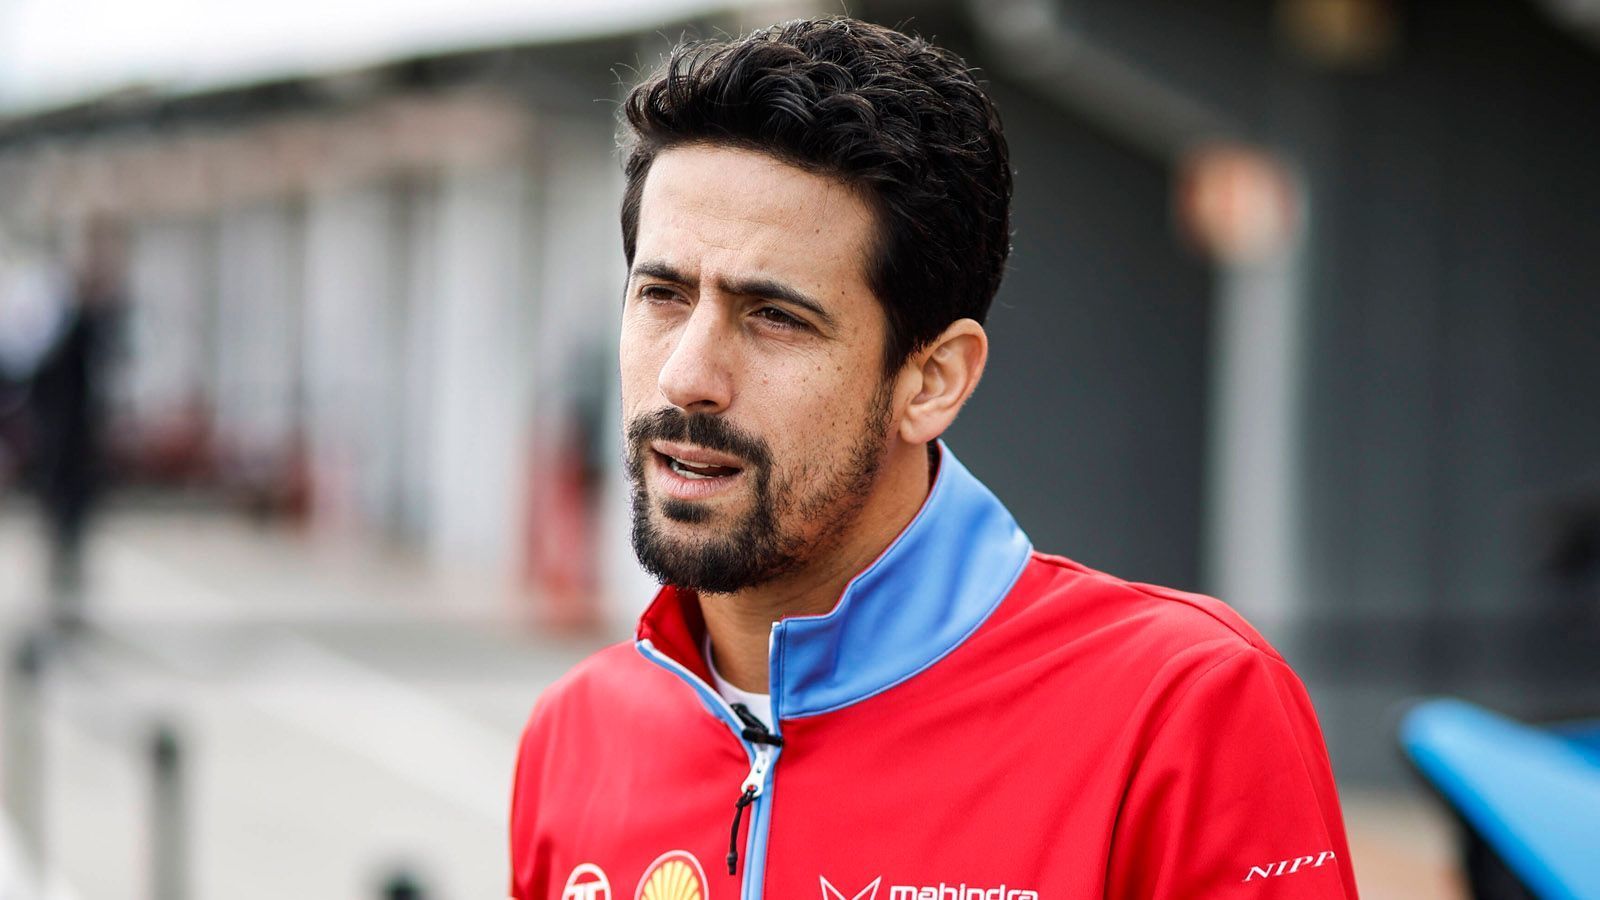 
                <strong>Lucas di Grassi (Mahindra)</strong><br>
                &#x2022; Strafpunkte: 7<br>&#x2022; Erster Verfall: 12. Februar 2023<br>
              